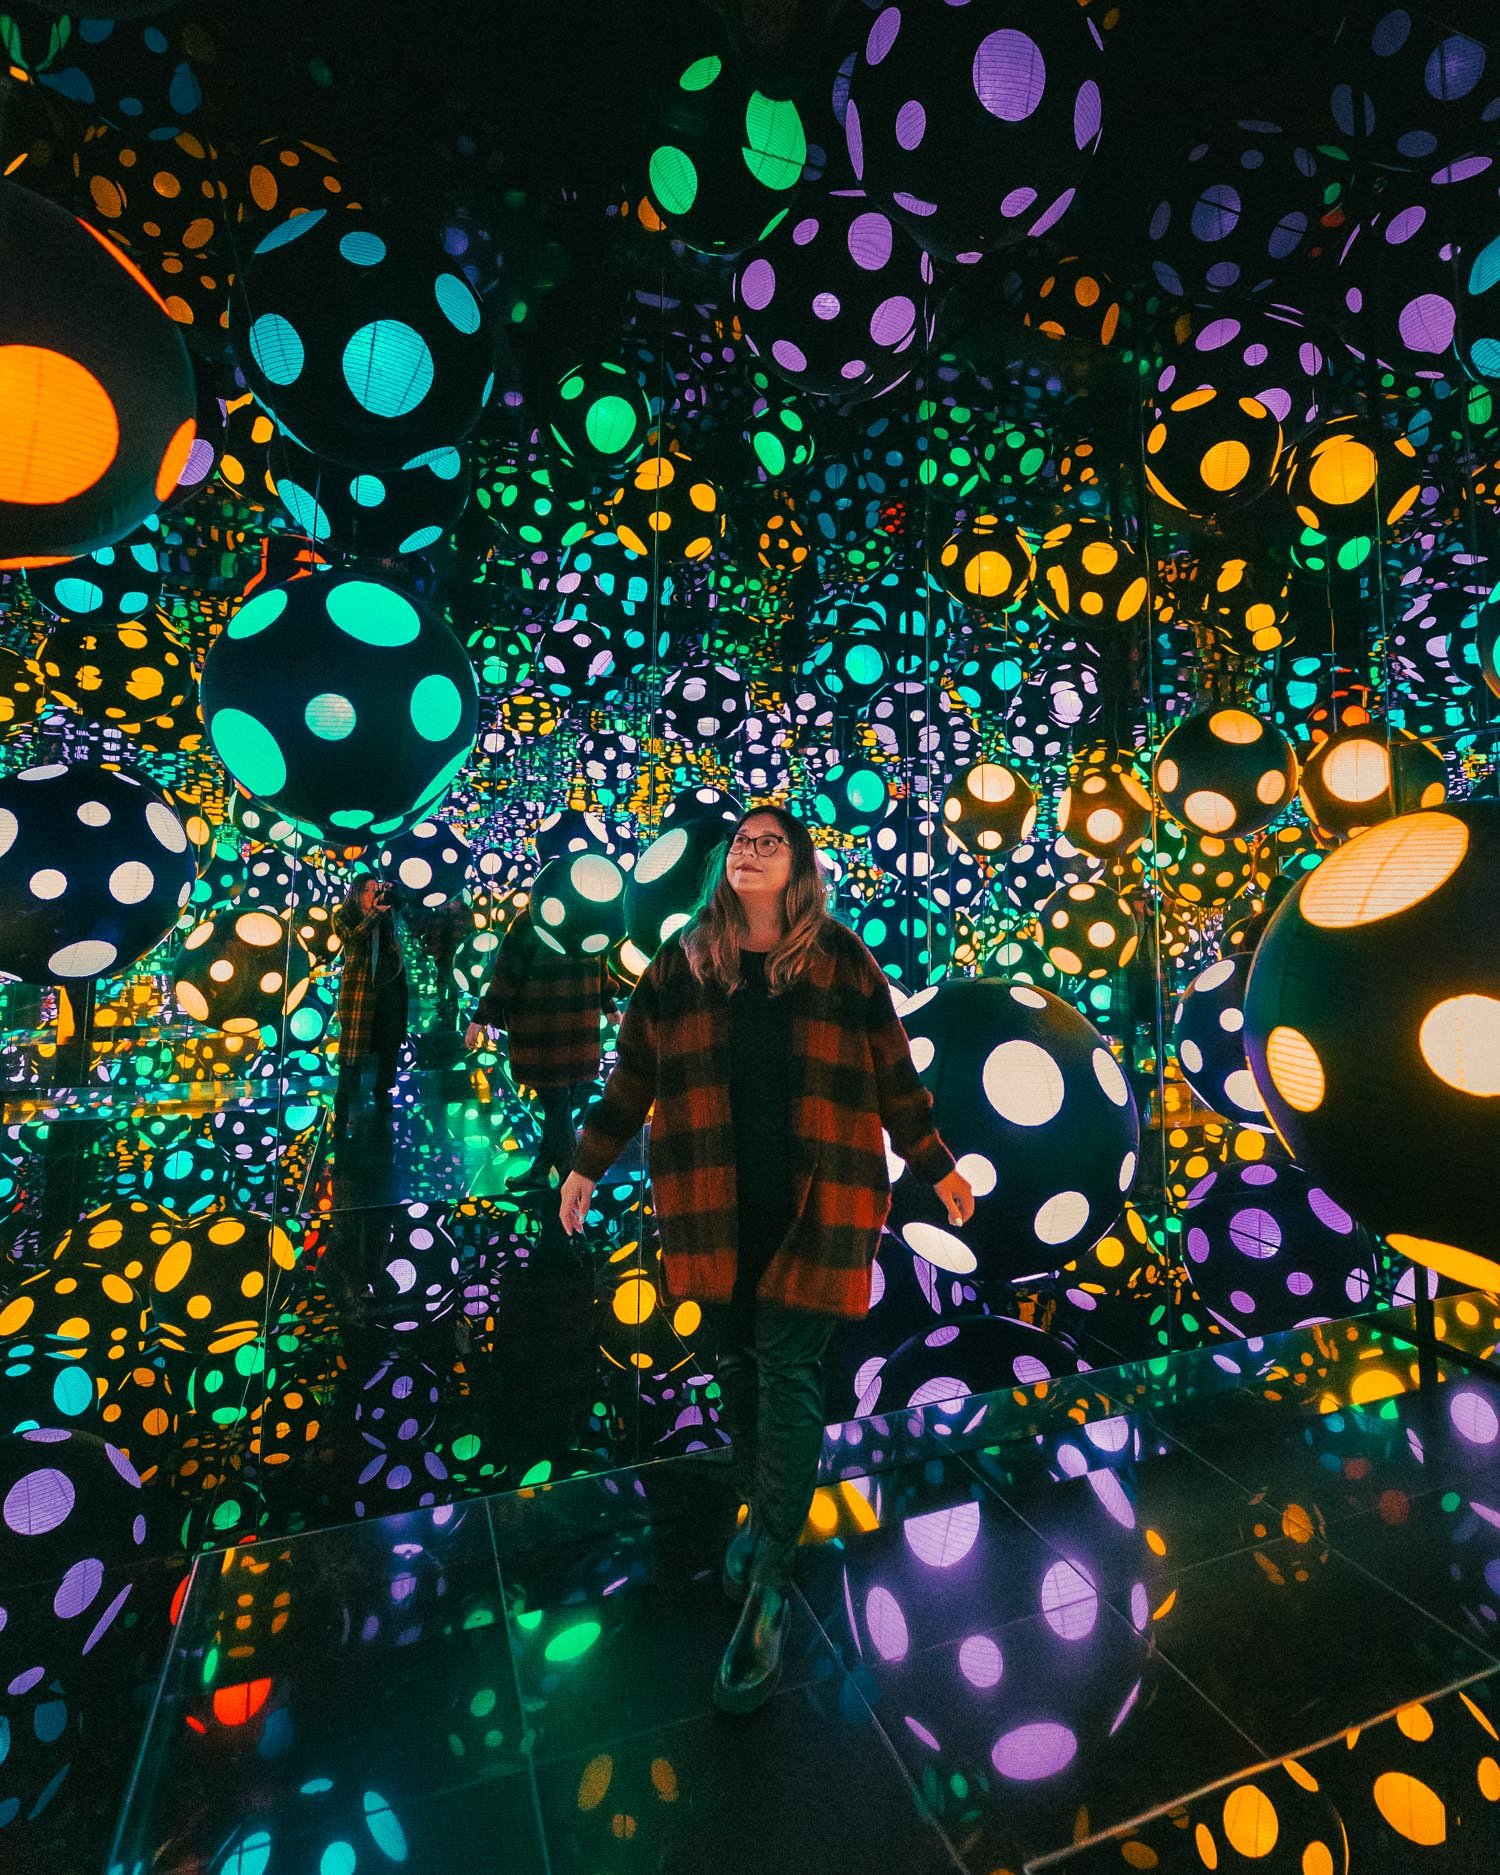 The Best Things to Do in Northwest Arkansas // Yayoi Kusama Infinity Mirror Room at Crystal Bridges Museum of American Art in Bentonville, AR